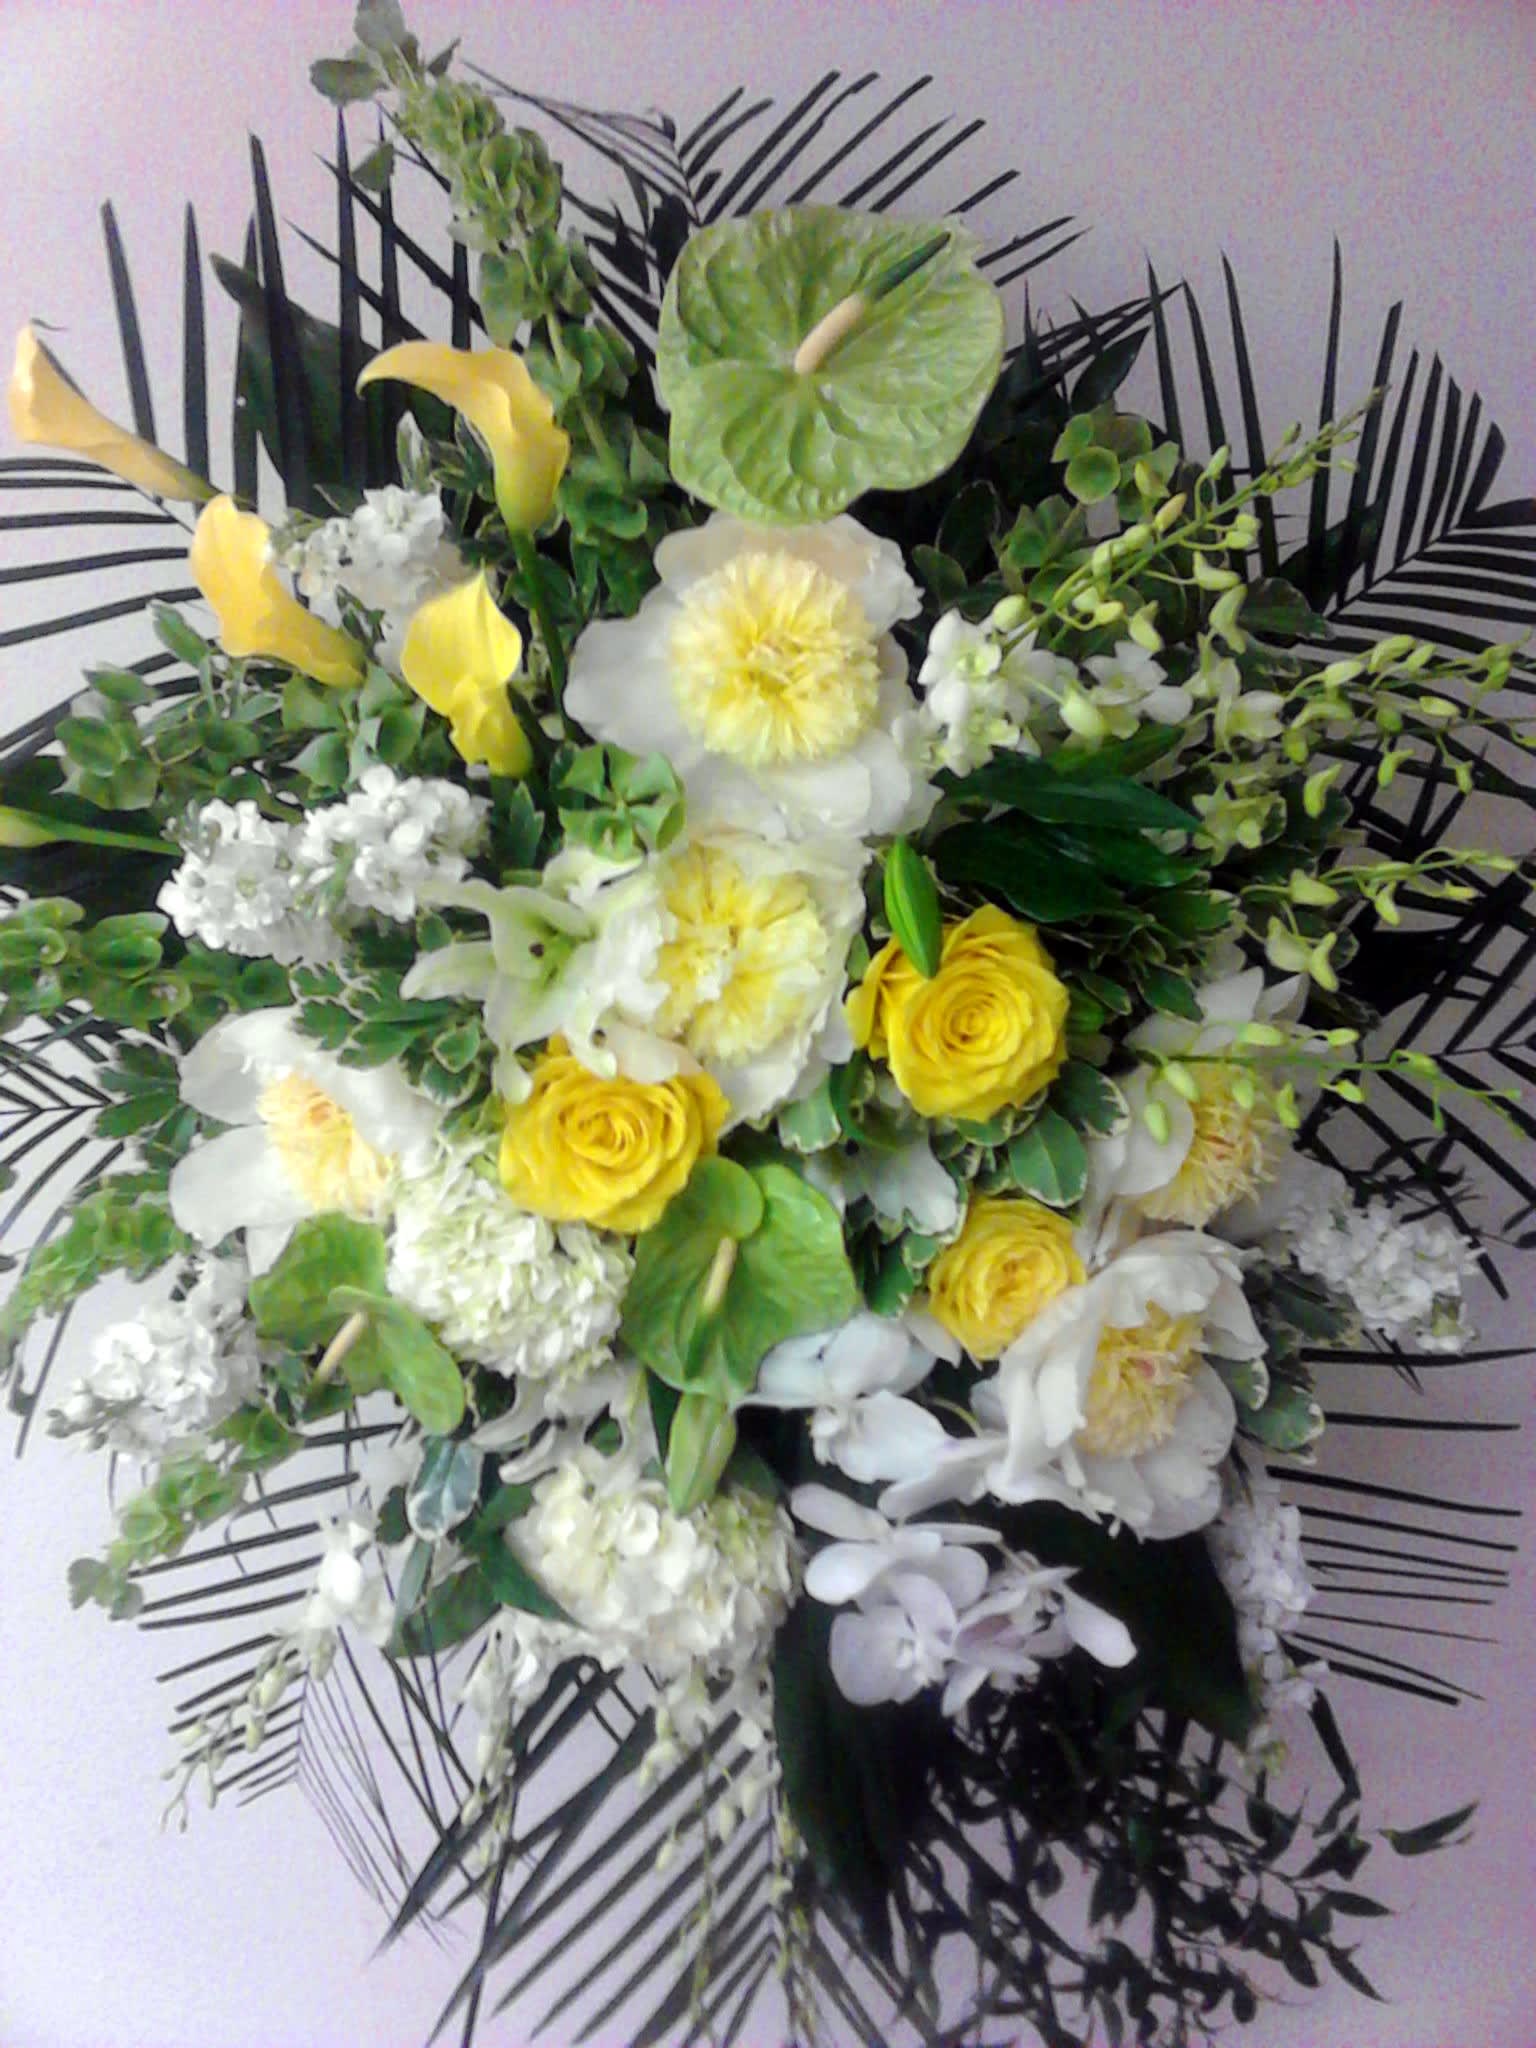 Eternity, MO-203 - Funeral spray with peonies, orchids, calla lilies, bells of Ireland, roses, and anthurium. Extra large!